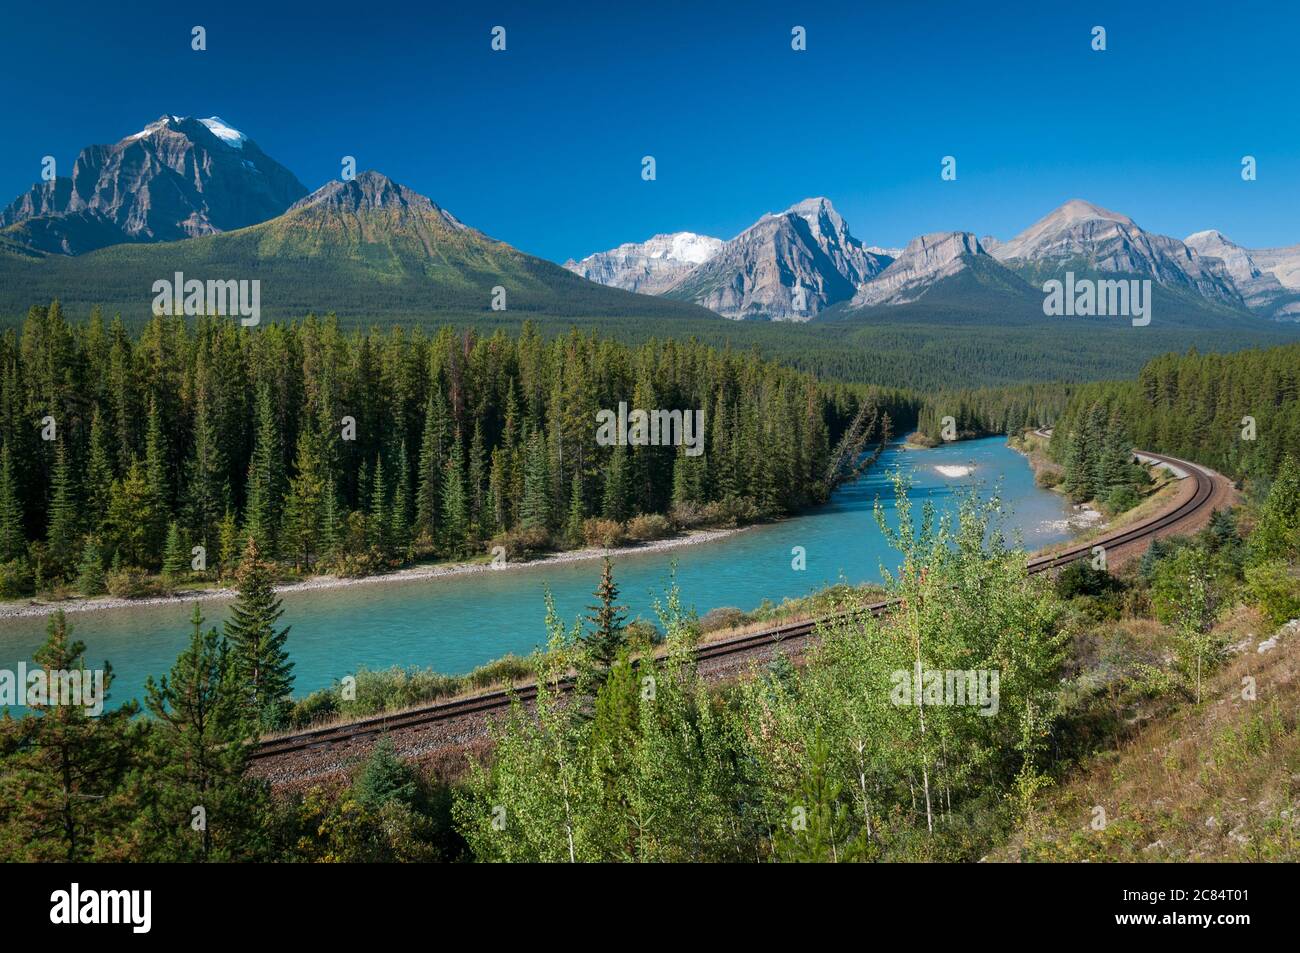 Morant's Curve on the Canadian Pacific Railroad, by the Bow River near Lake Louise, Alberta, Canada. Stock Photo